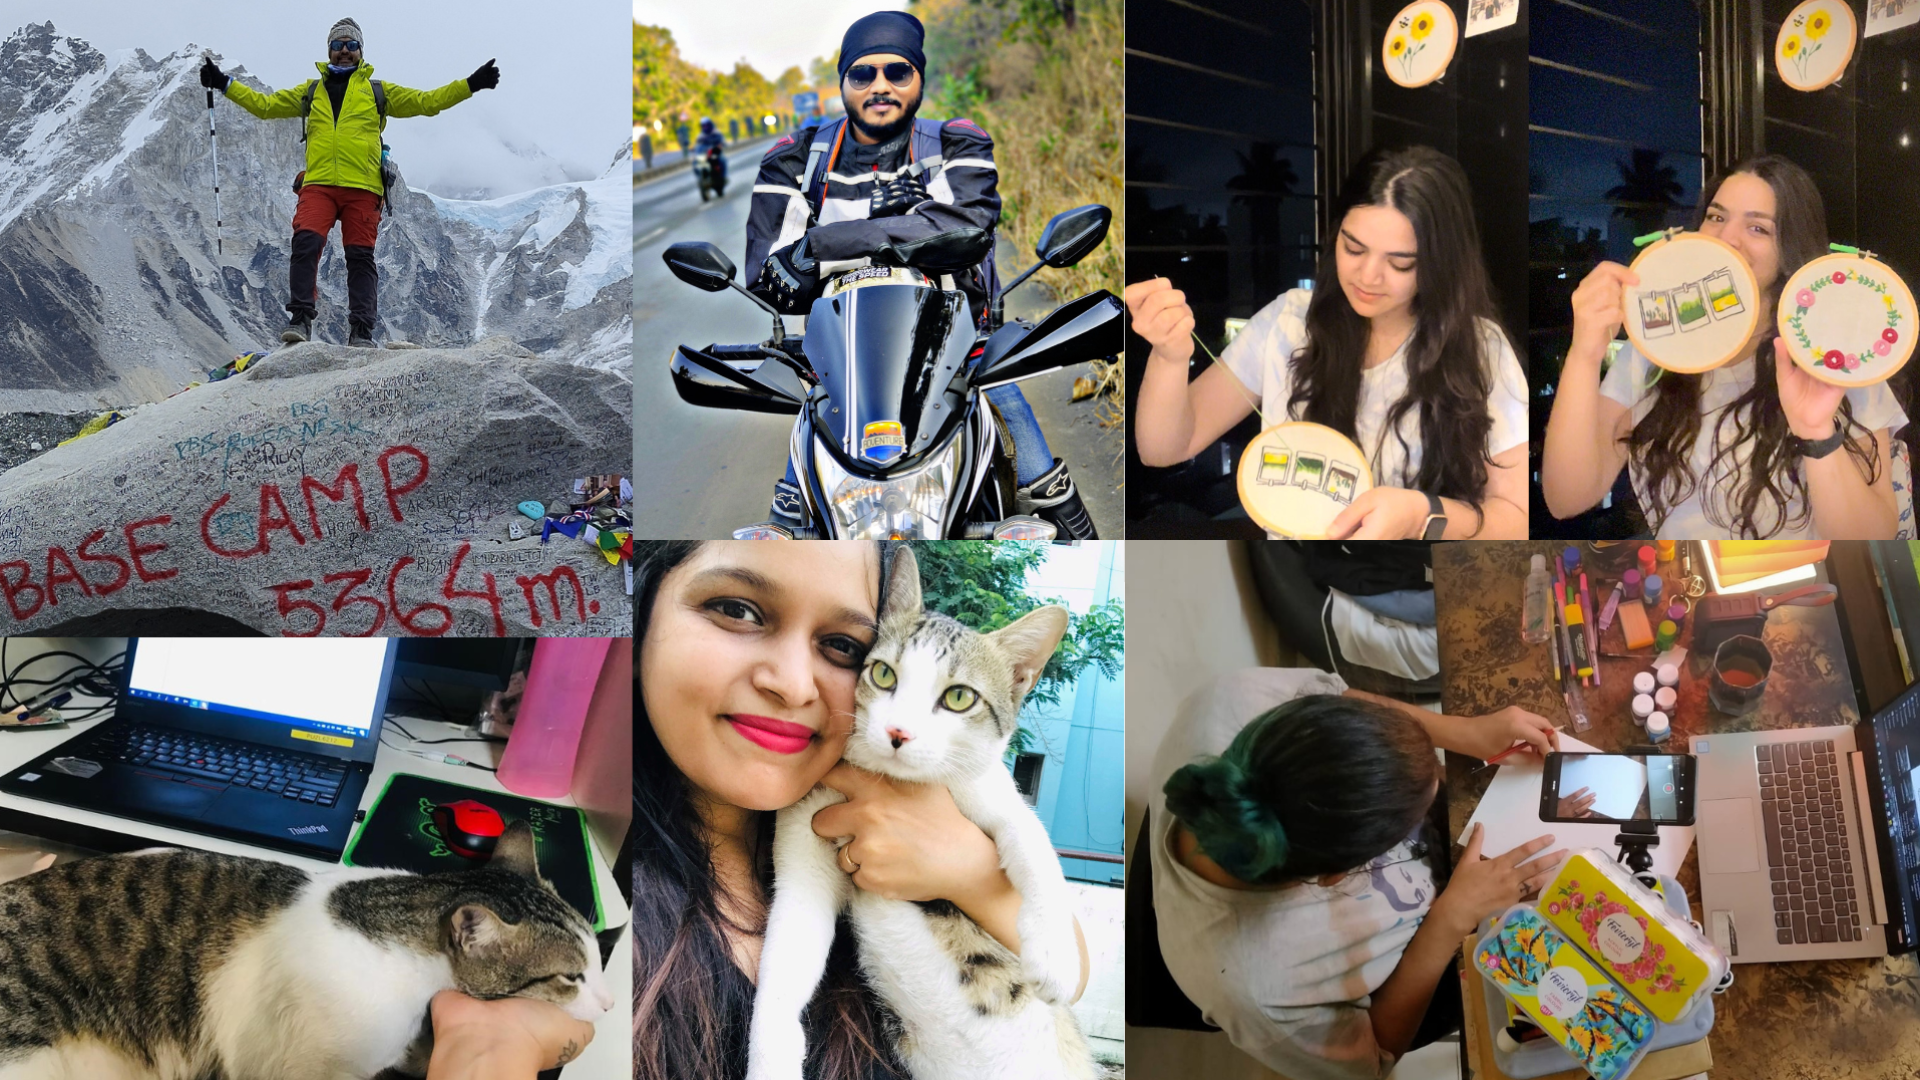 Collage of employee photos from the Knorr-Bremse Technology Center India during their leisure activities